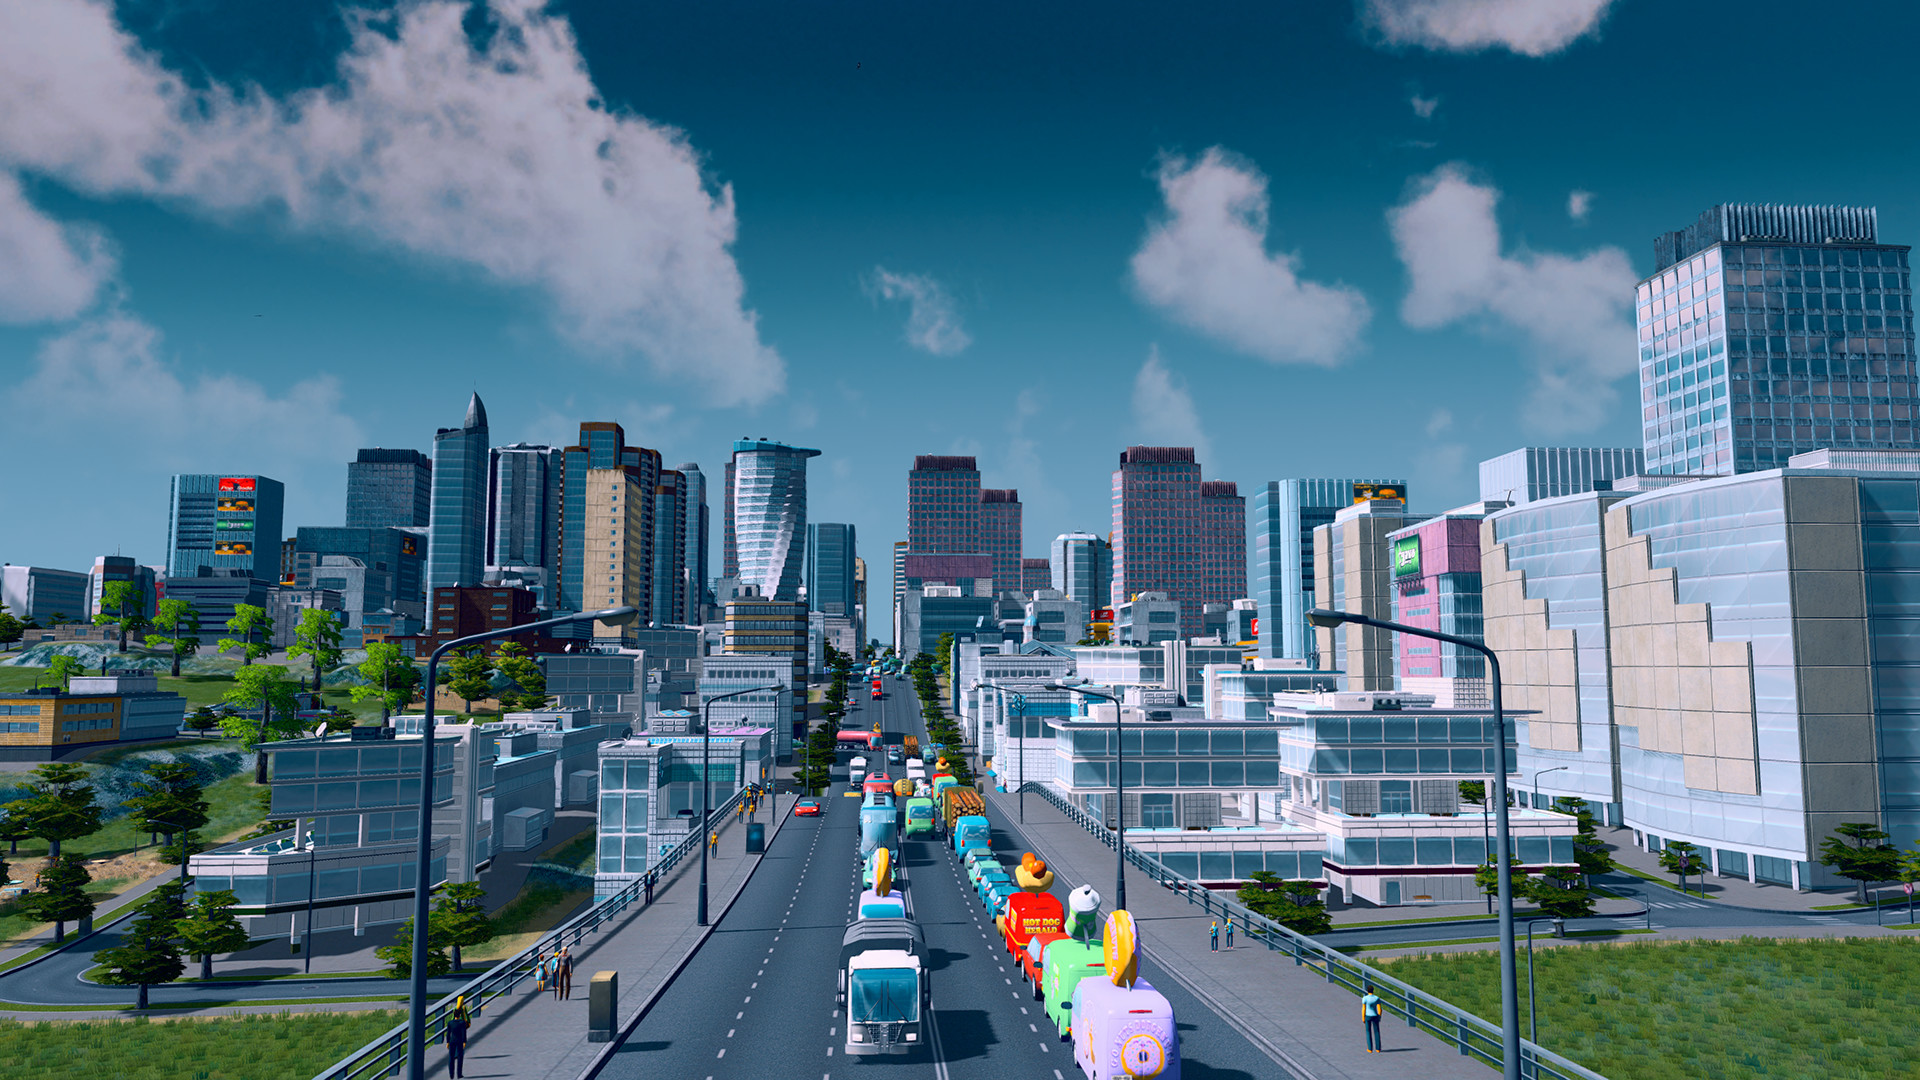 Cities: Skylines Deluxe Edition[STEAM]🌍GLOBAL ✔️PAYPAL